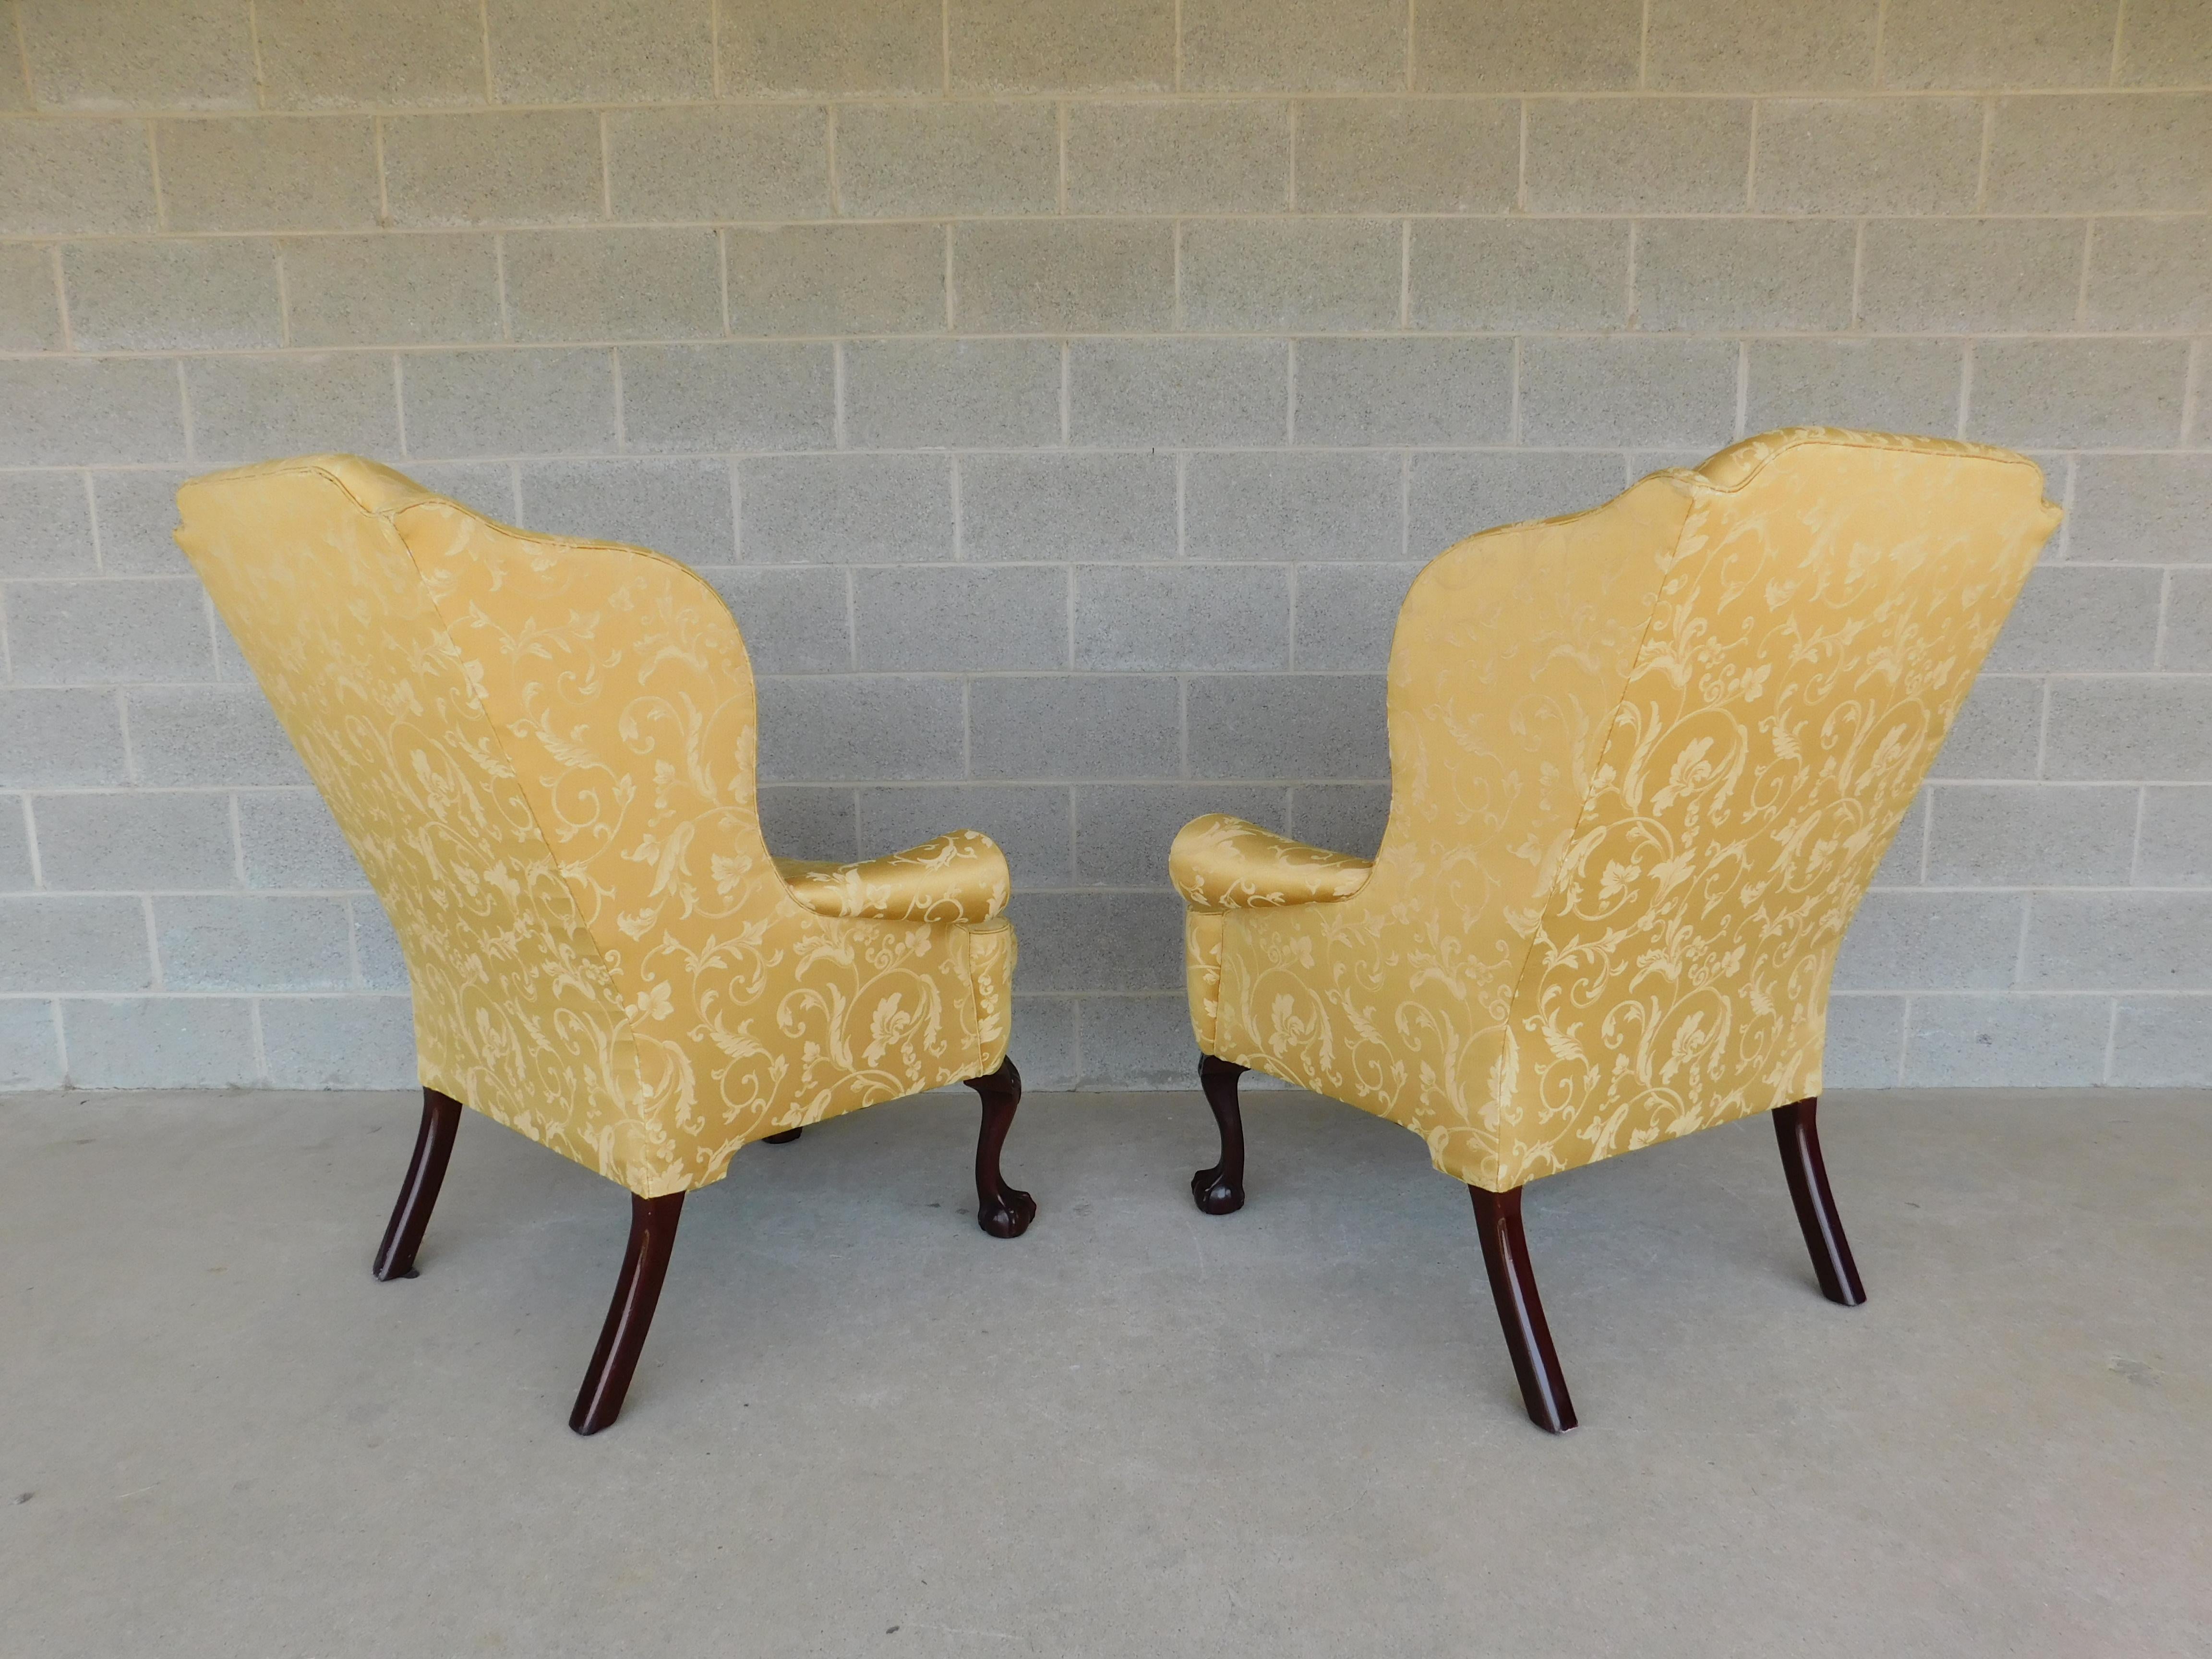 KIndel Winterthur Chippendale Ball & Claw Wingback Chairs - a Pair

Original upholstery, down filled seat cushion, hand rubbed finish Mahogany shell carved knees ball & claw feet

Golden yellow silk fabric, small wear area on the backside of the top